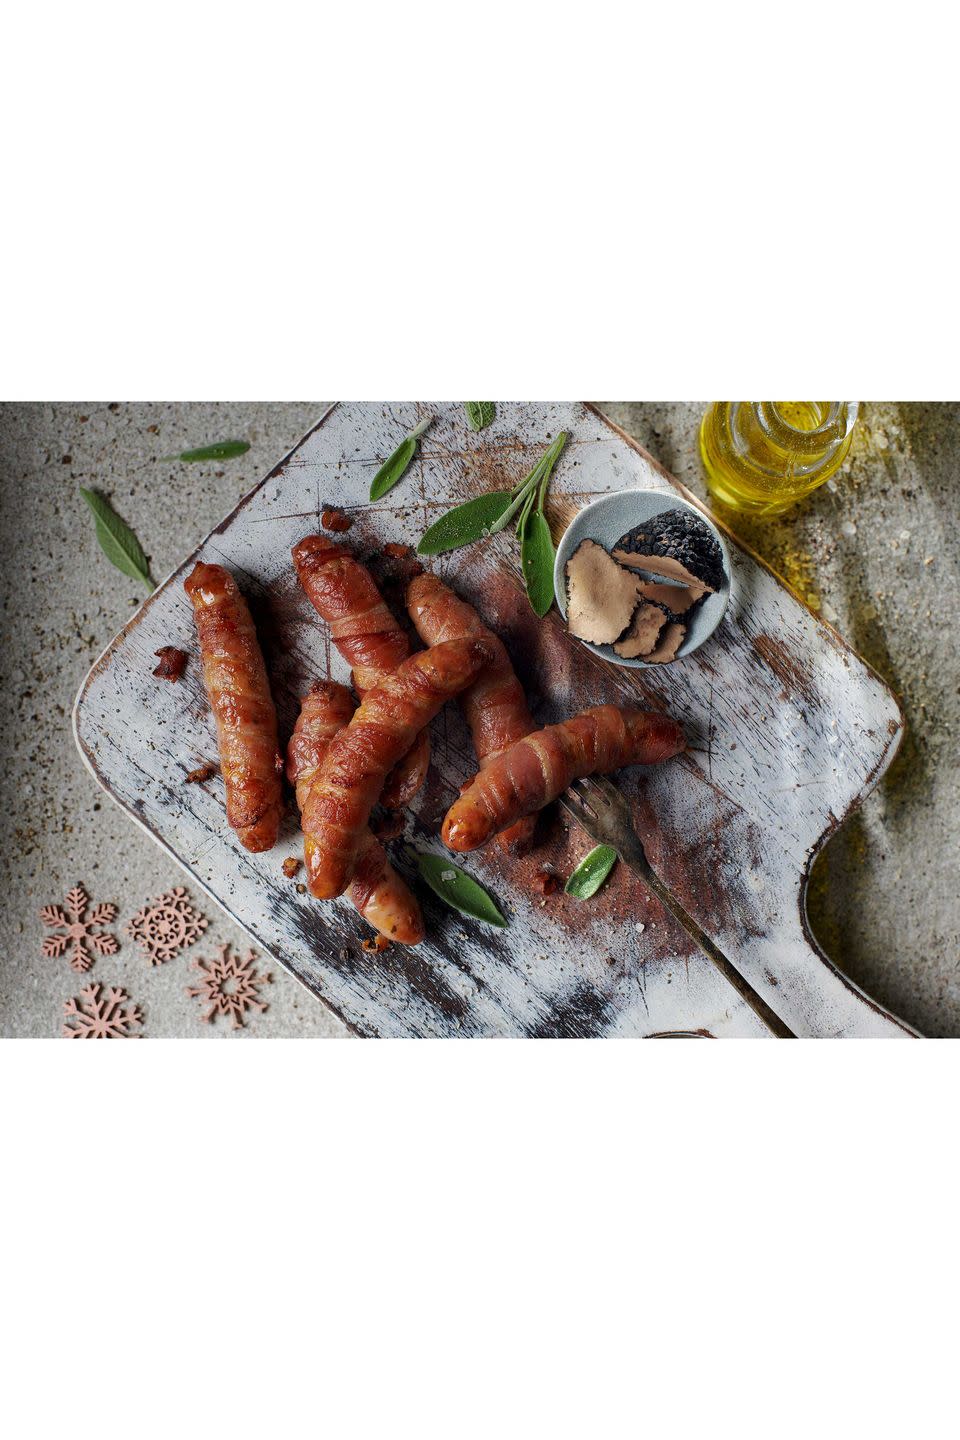 Co-op Irresistible Extra Posh Pigs in Blankets